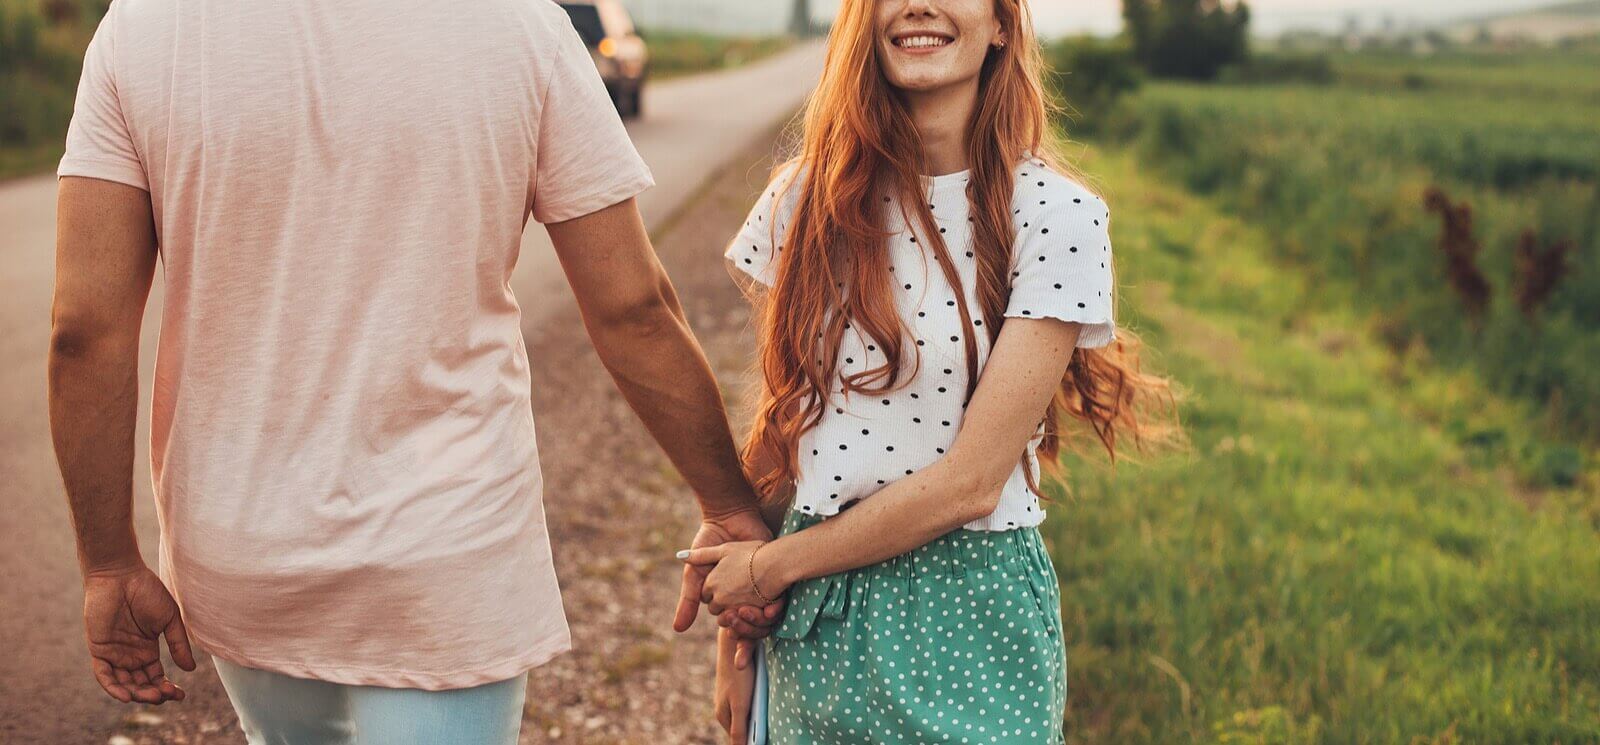 Photo of a happy couple smiling and walking down the side of a road. Looking to reconnect with your partner and repair relationship damage. Discover how a couples therapist in Florida can help you regain trust and communication in your relationship.